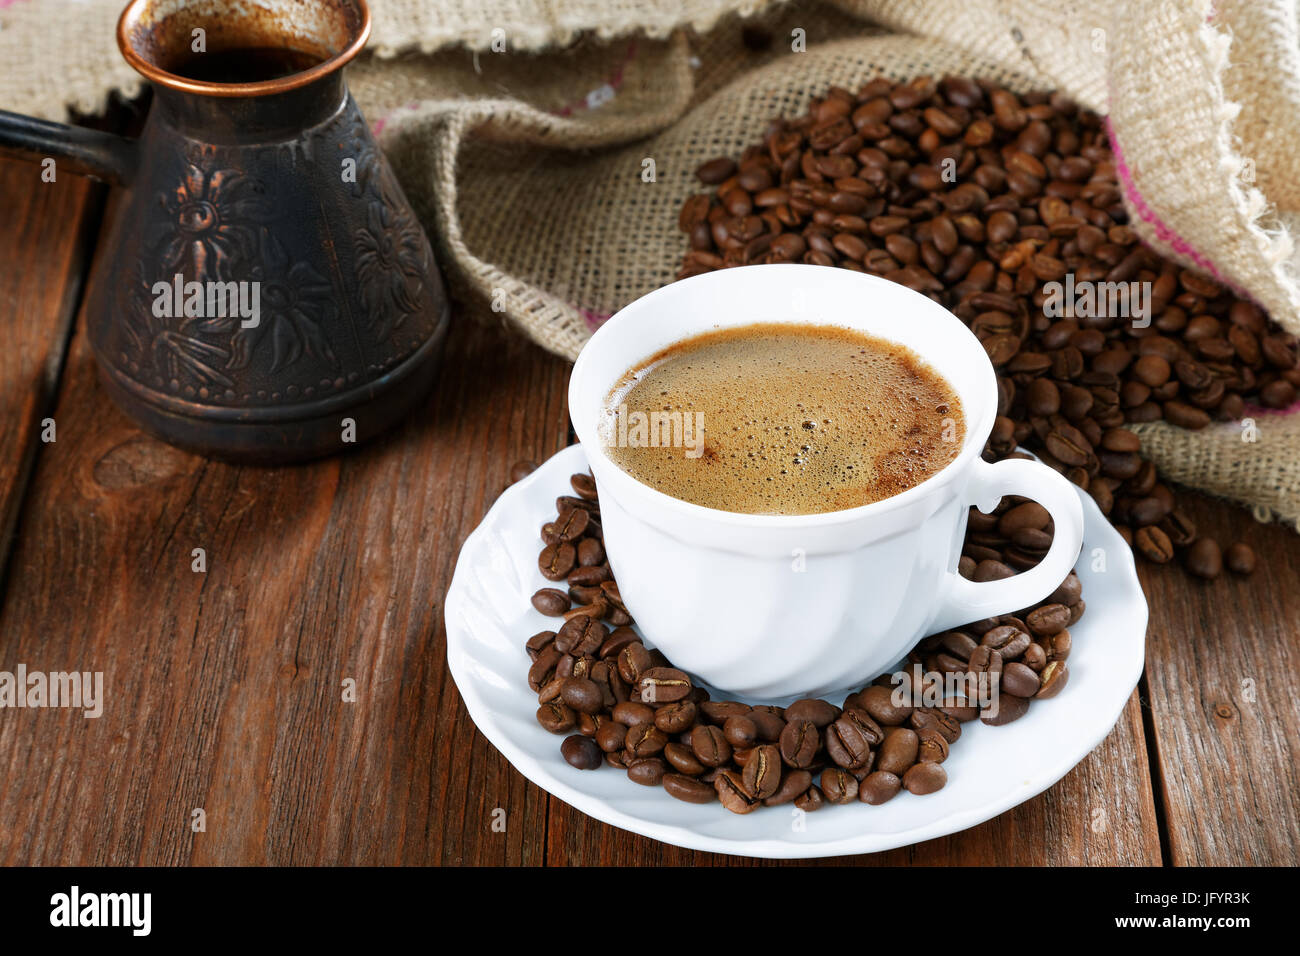 Cup with coffee on the table next to coffee beans Stock Photo